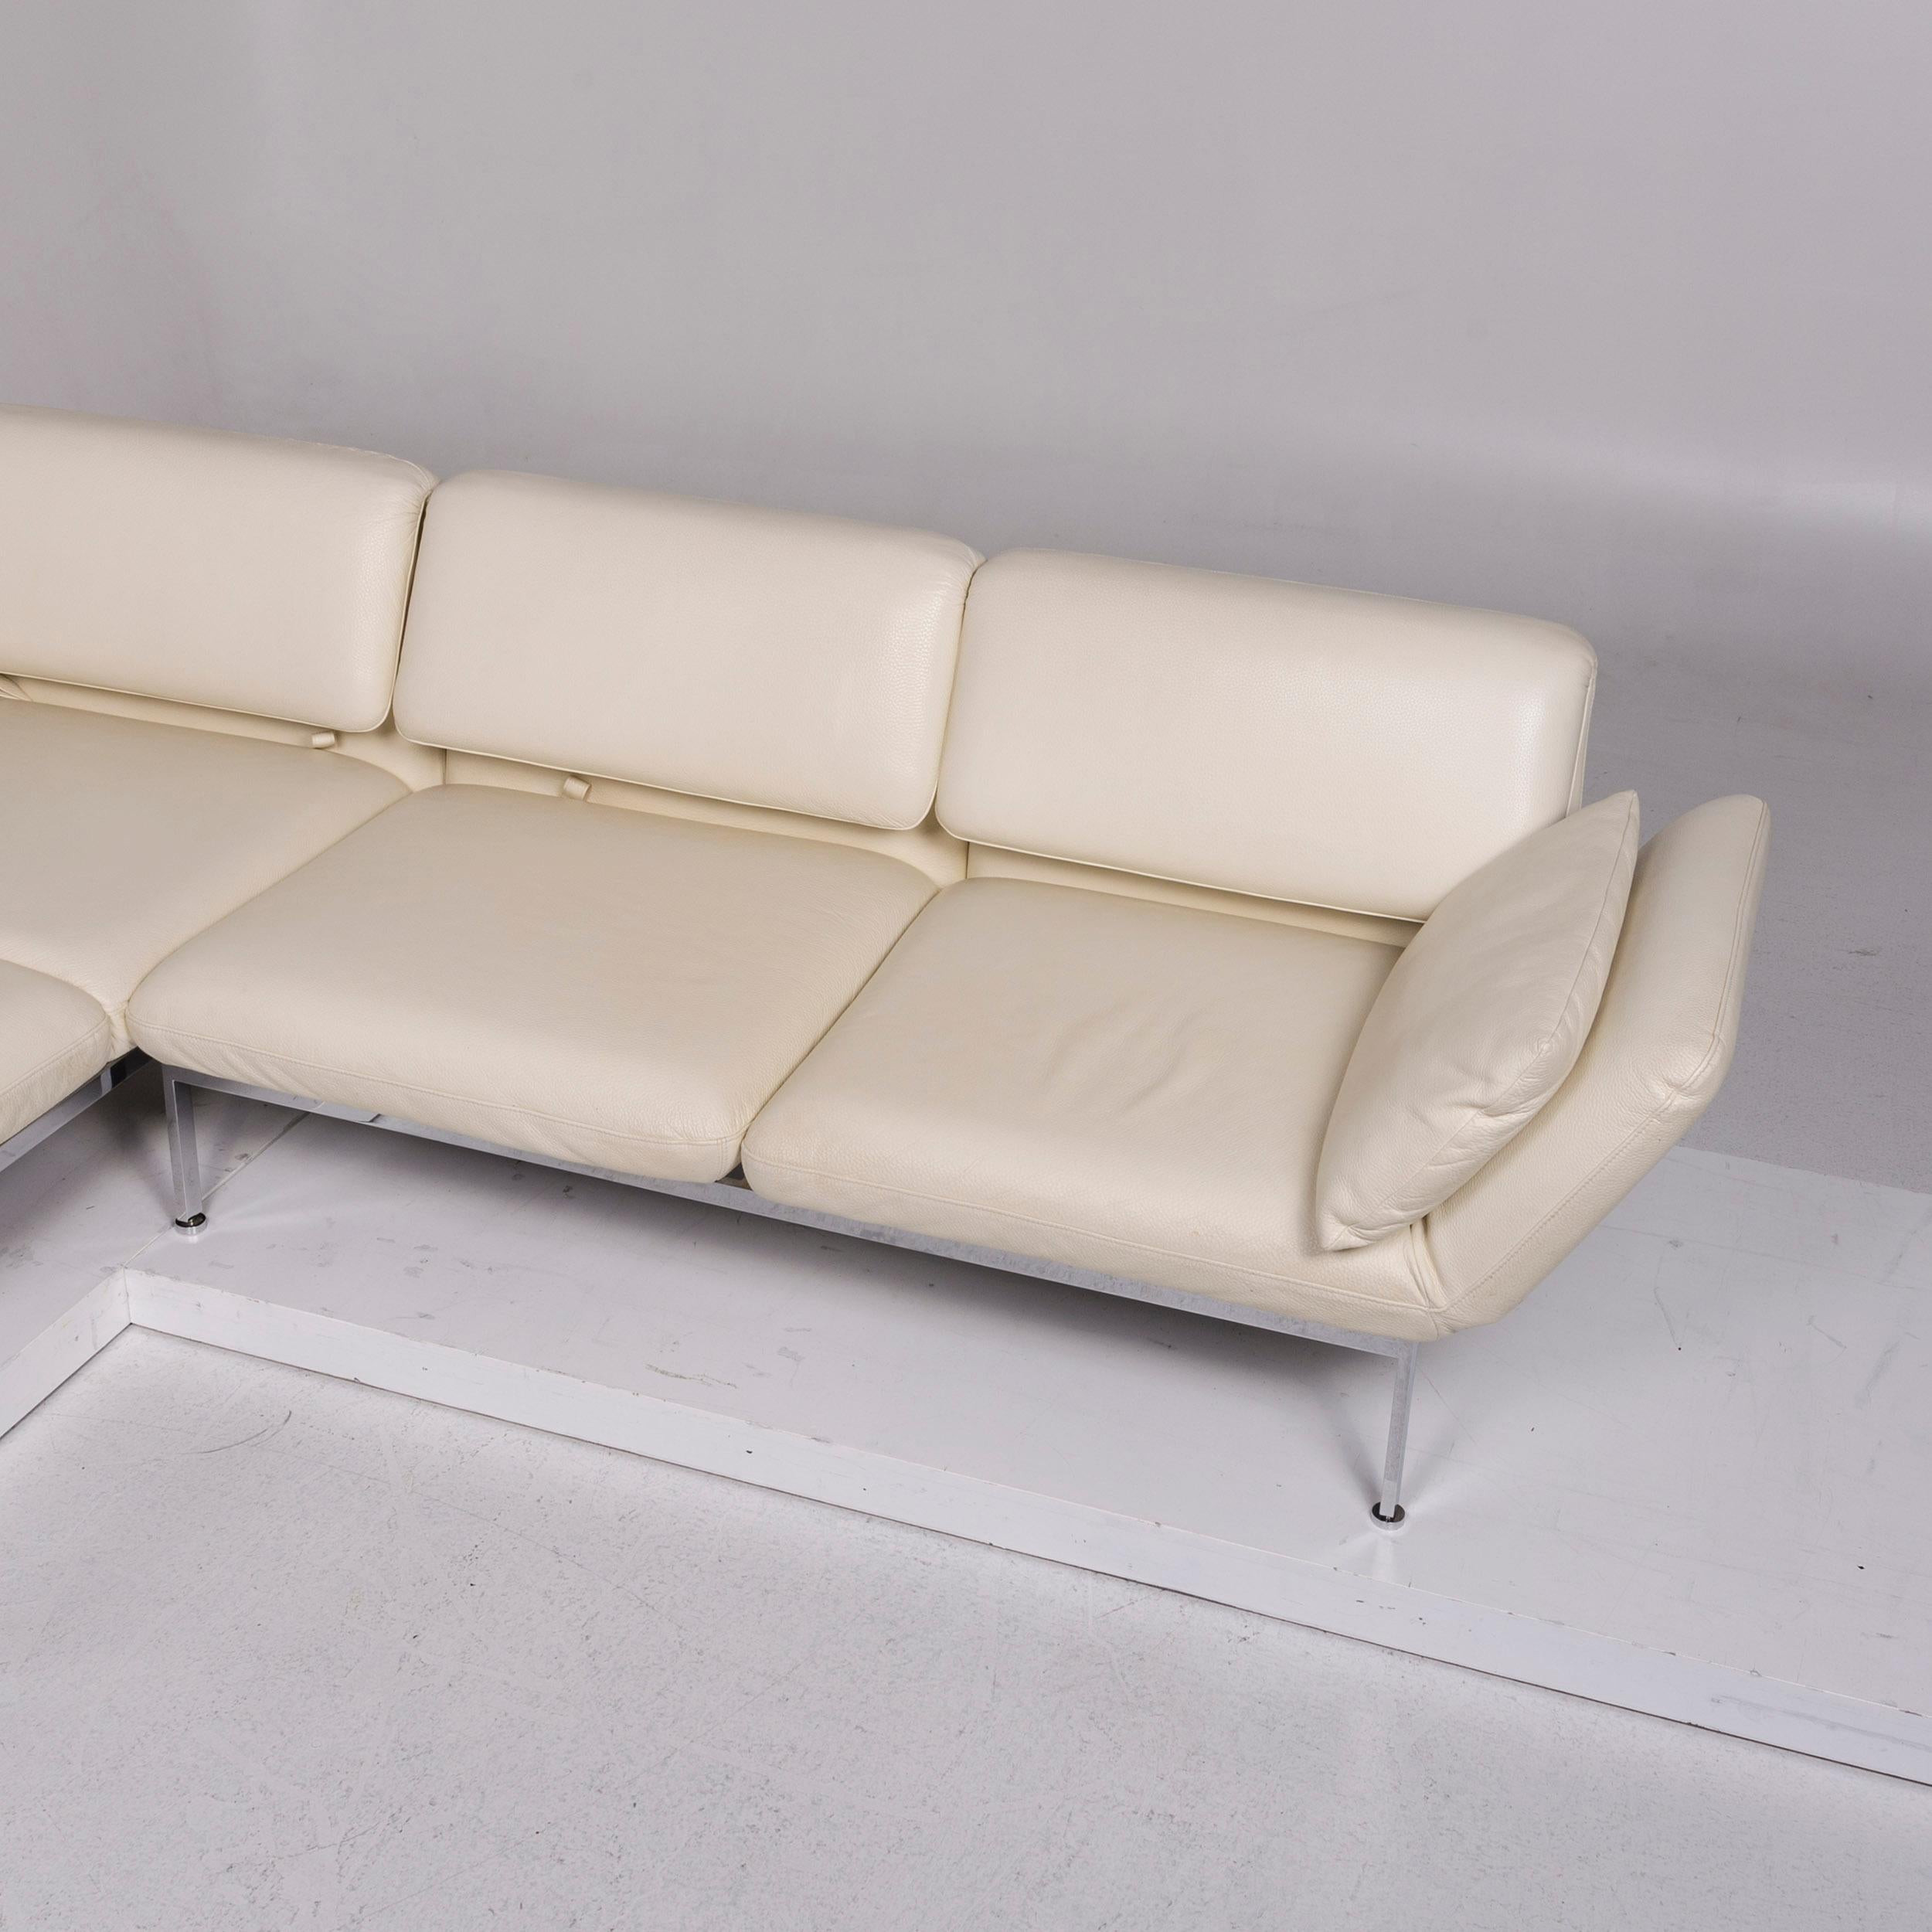 Brühl & Sippold Roro Leather Corner Sofa Cream Sofa Function Relax Function For Sale 4